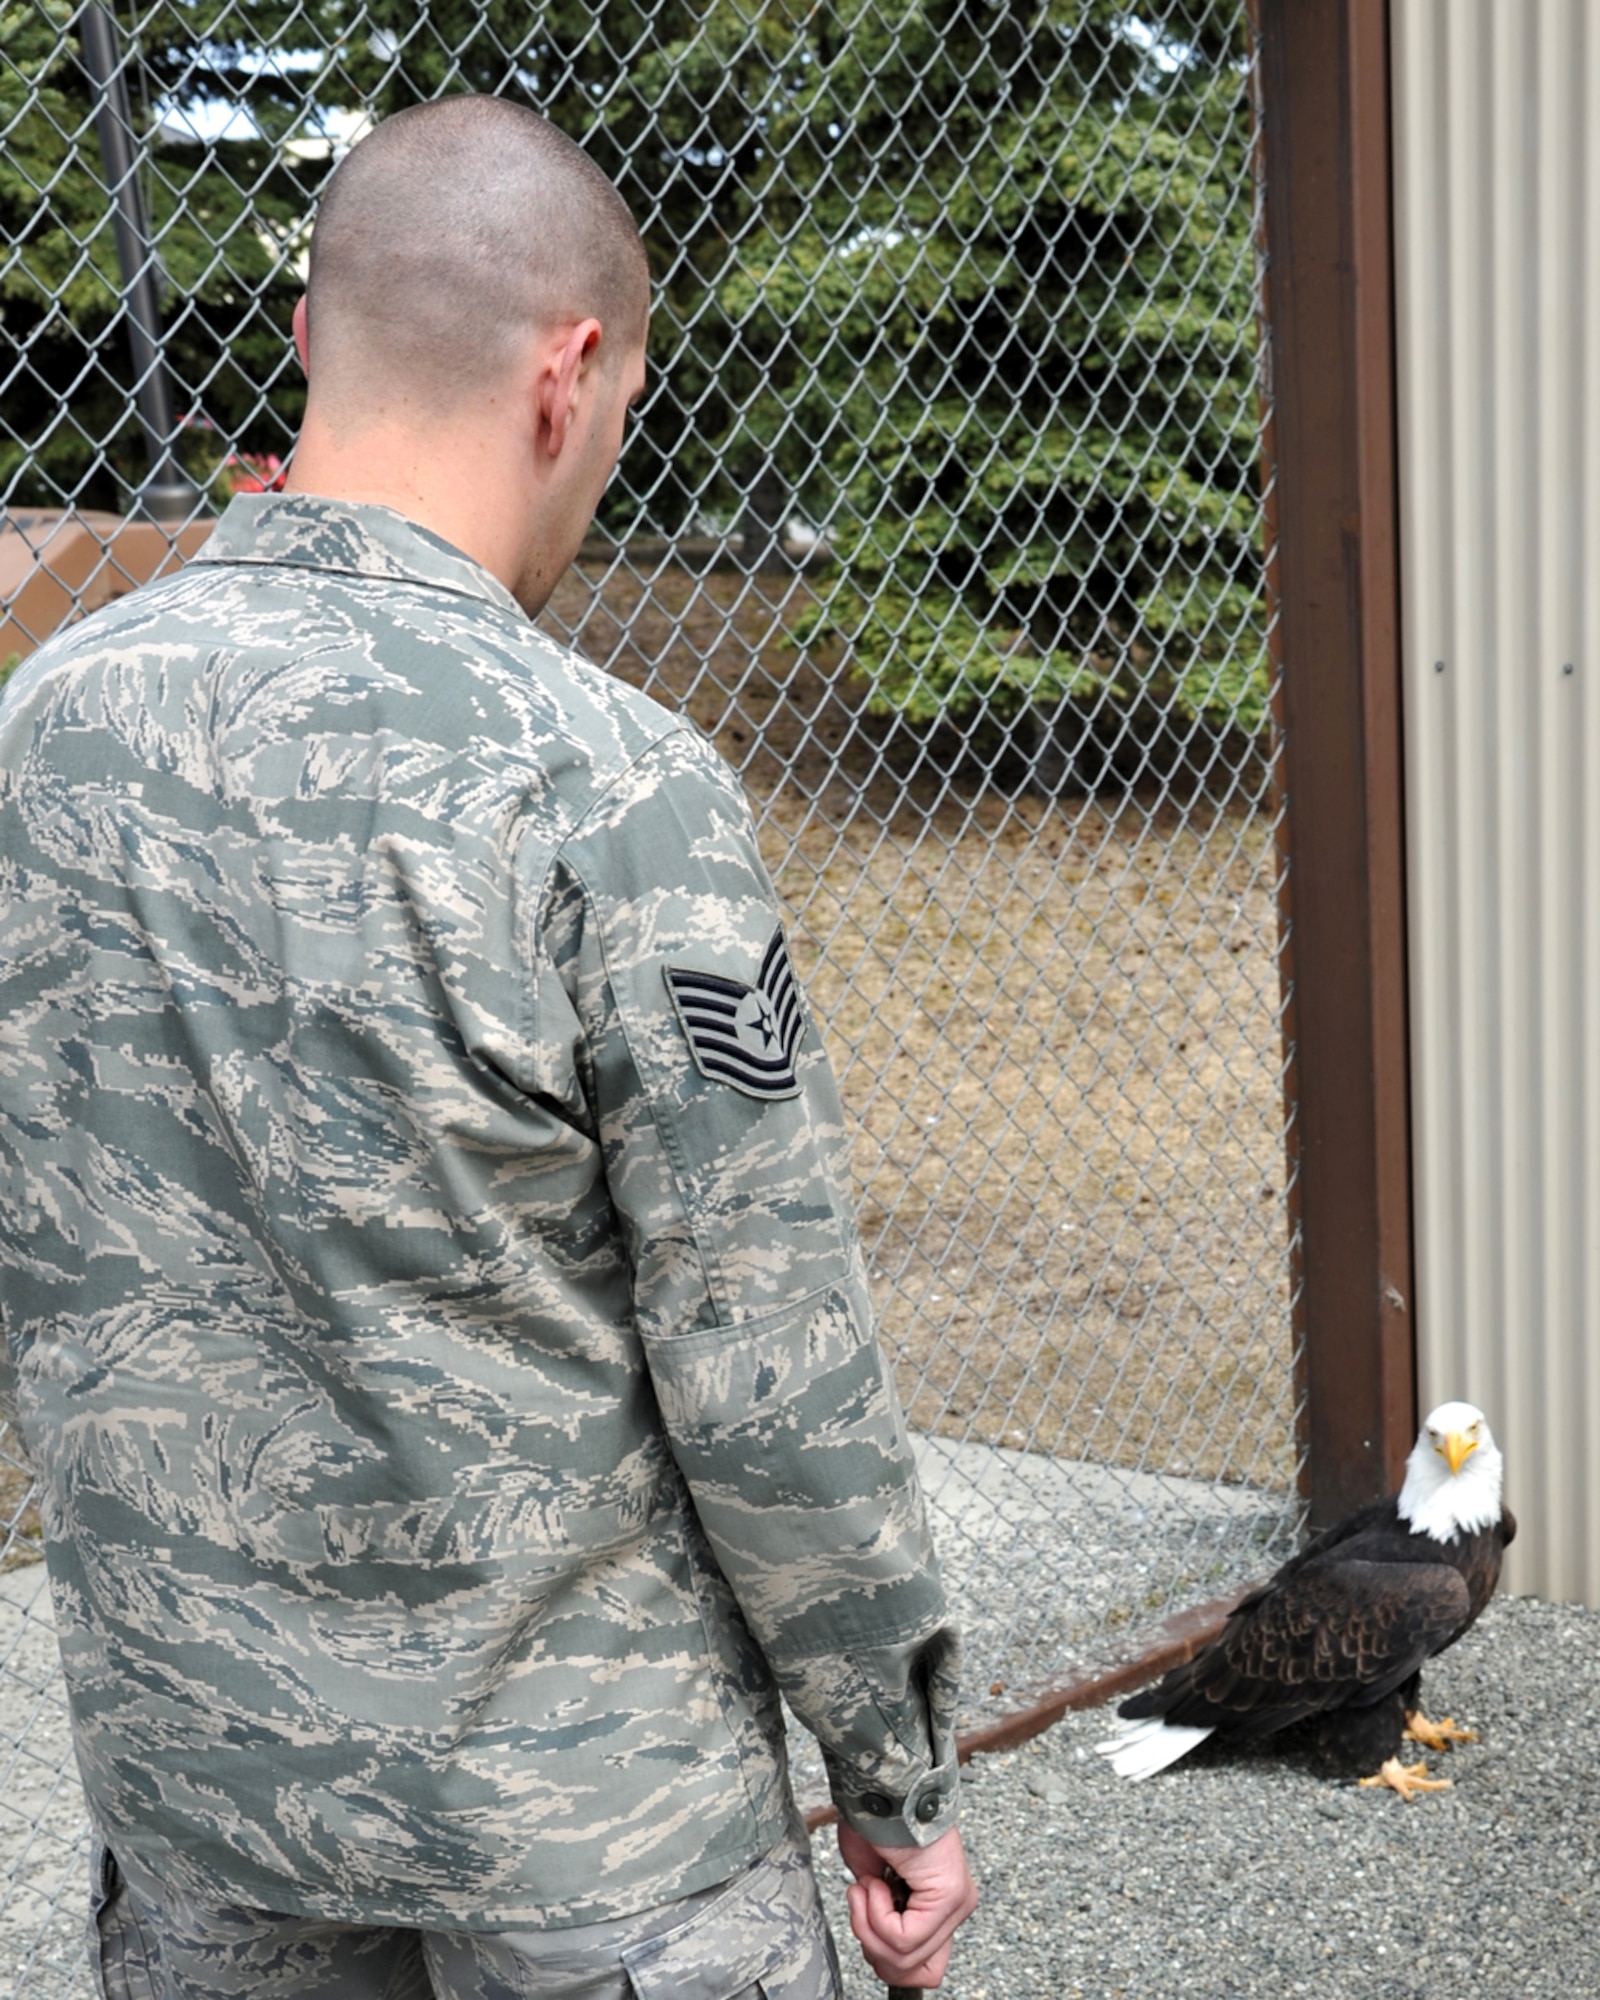 130511-F-IY975-006: JOINT BASE ELMENDORF-RICHARDSON, Alaska -- Tech. Sgt. Timothy Ayers, 3rd Munitions Squadron, prepares to capture Notch Wing, one of the two Bald Eagles that reside in the Joint Base Elmendorf-Richardson eagle cage, in order to clean the cage May 11. Ayers is part of a group of volunteers who maintains the cage and cares for the eagles, which have been injured and are not able to survive in the wild. (U.S. Air Force photo/Senior Airman Blake Mize)